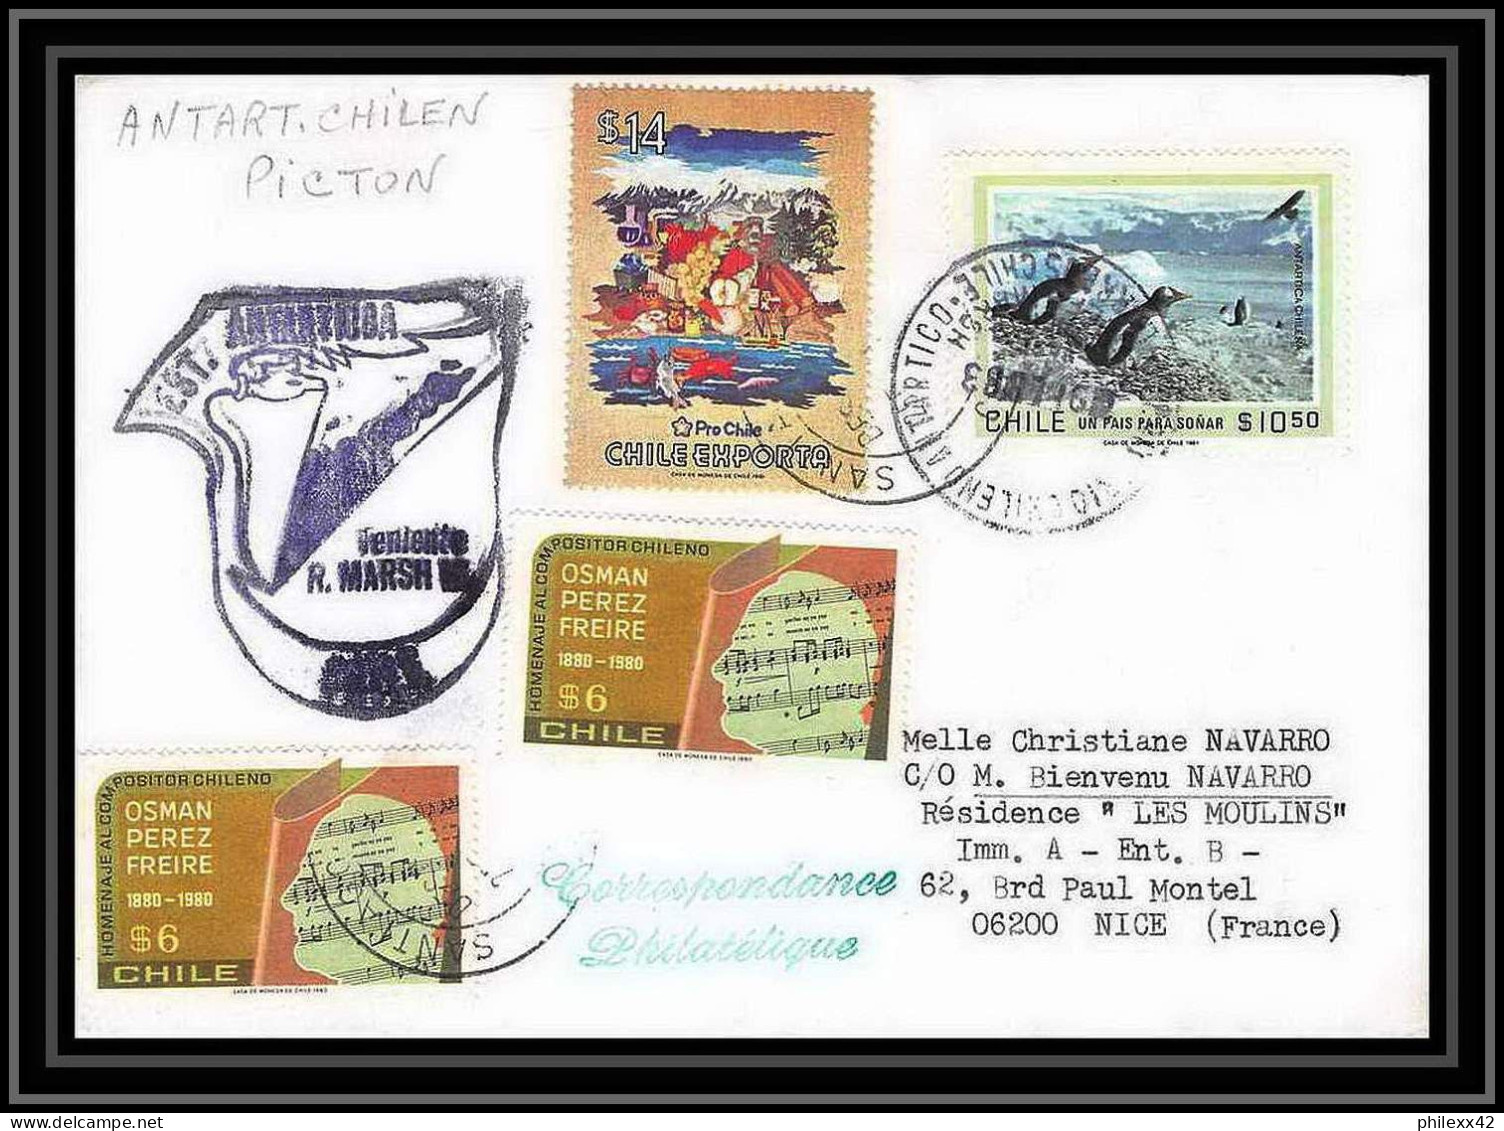 1916 Antarctic Chili (chile) Lettre (cover) Picton 9/2/1983  - Onderzoeksstations